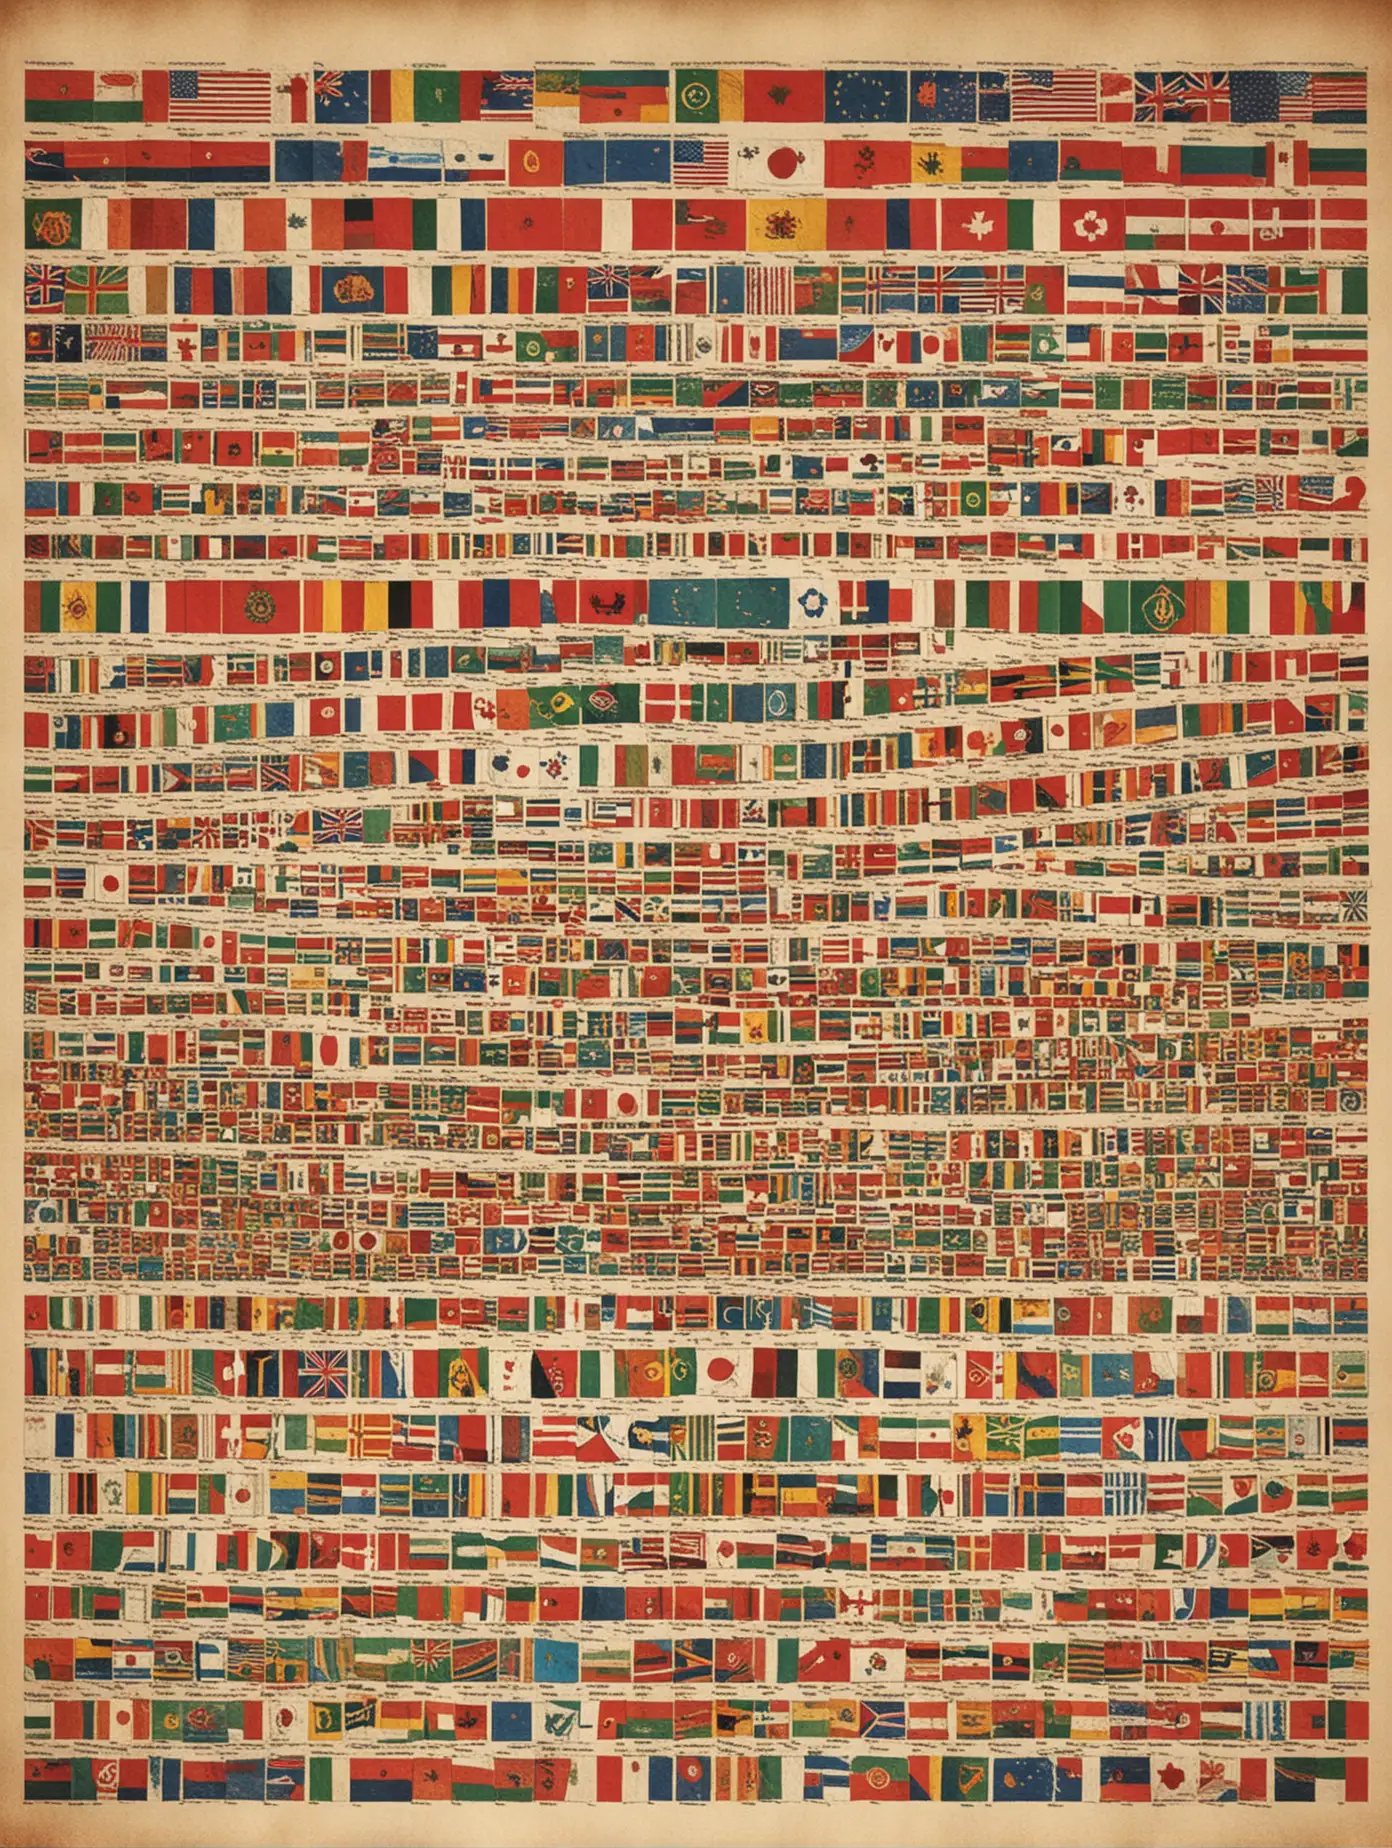 flags of the world, vintage style poster with many world coutries flags